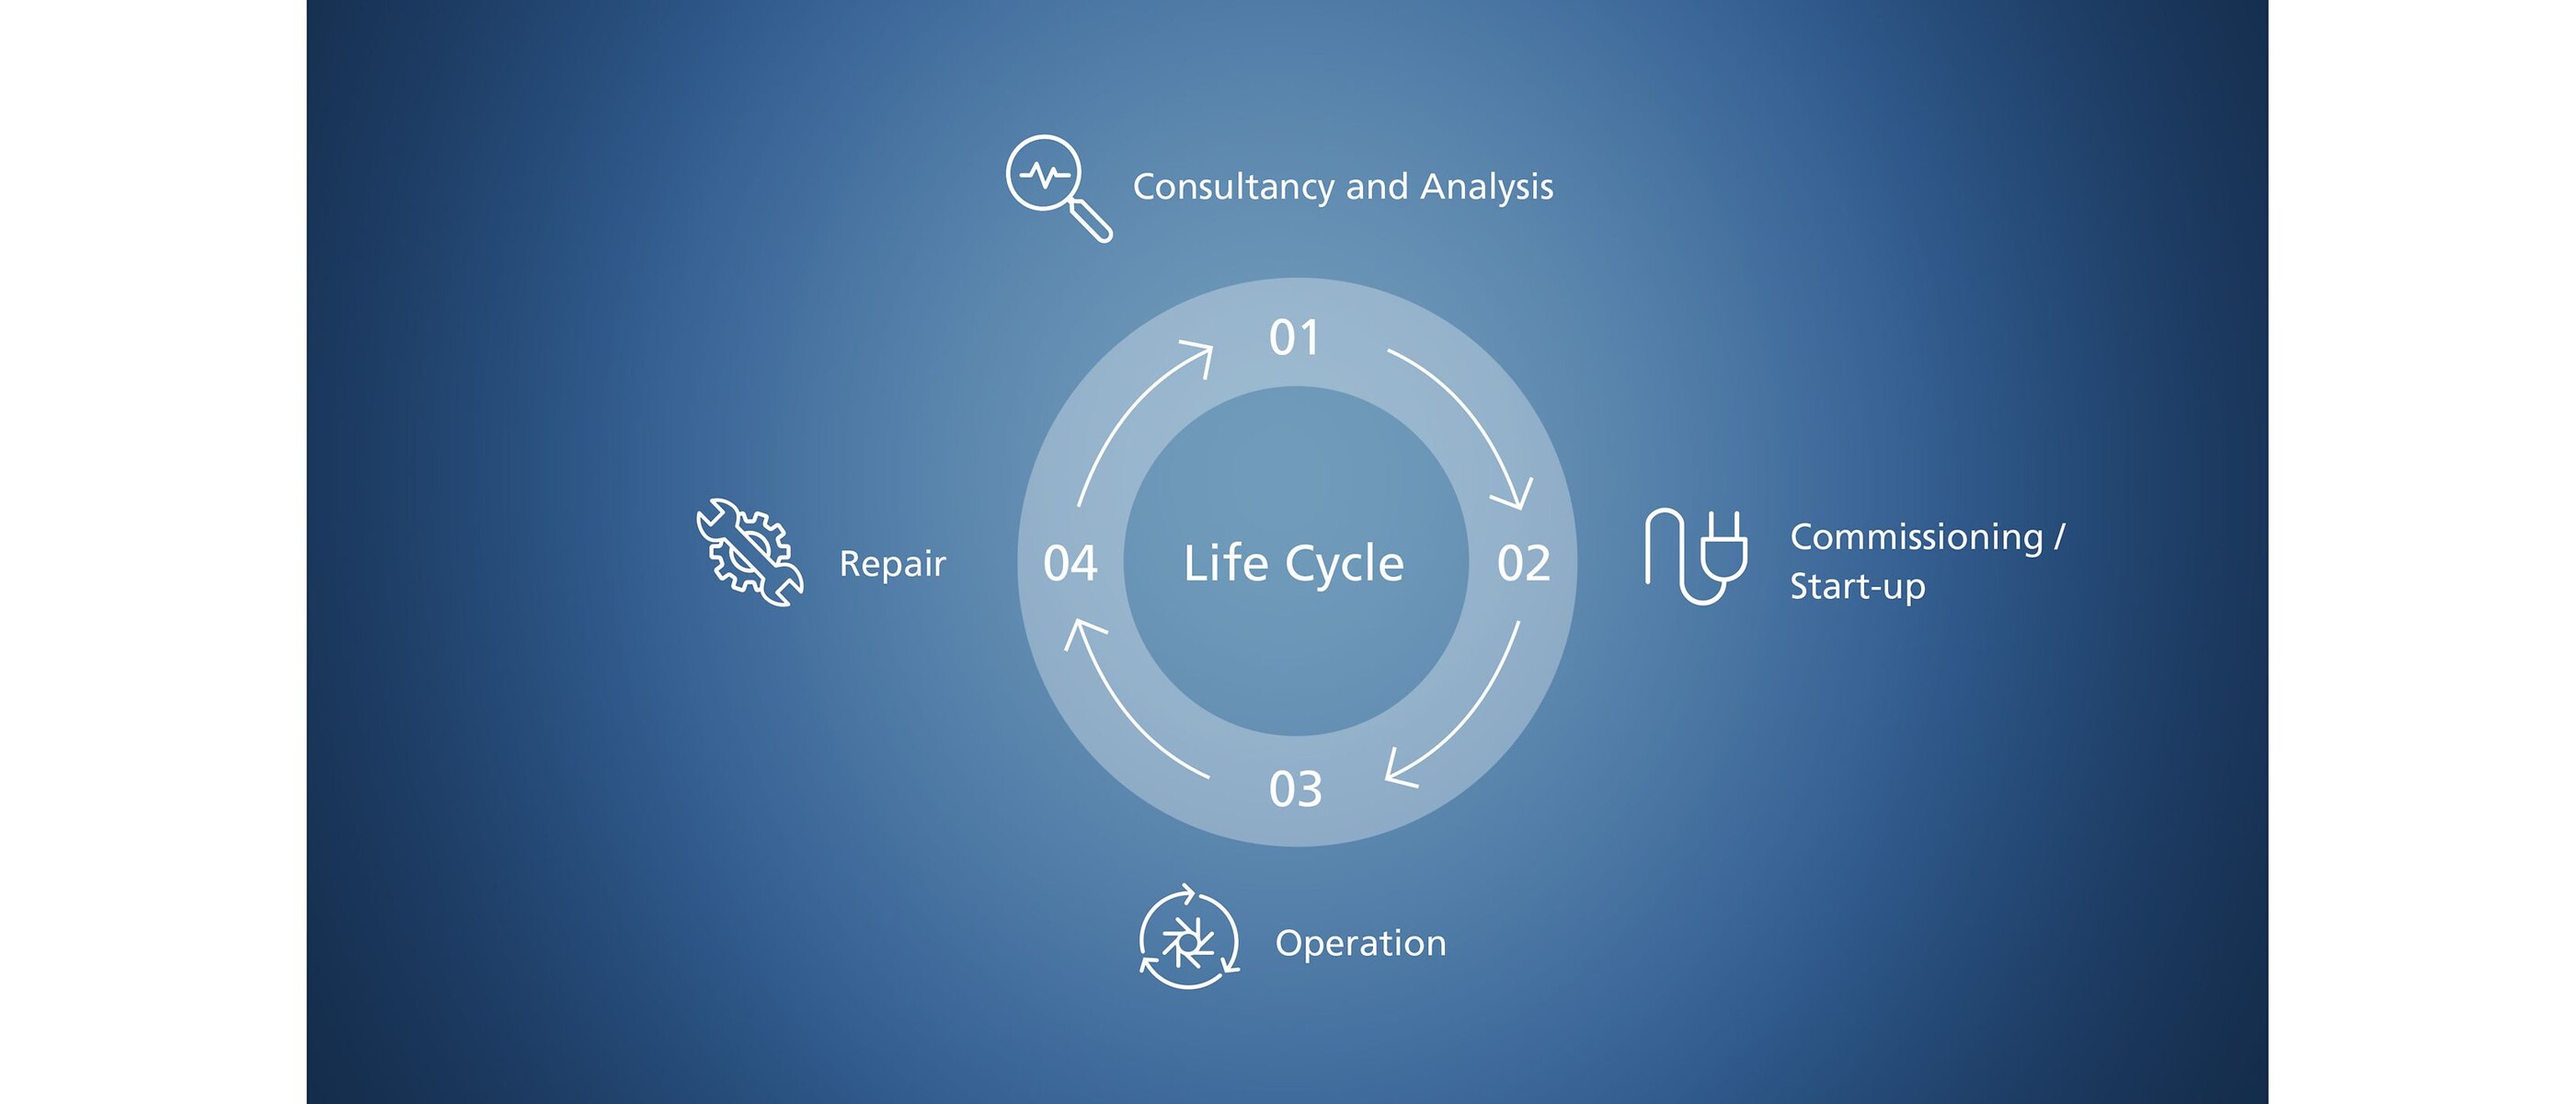 Illustration of the phases of a product life cycle: Consultation and analysis, commissioning, operation and repair